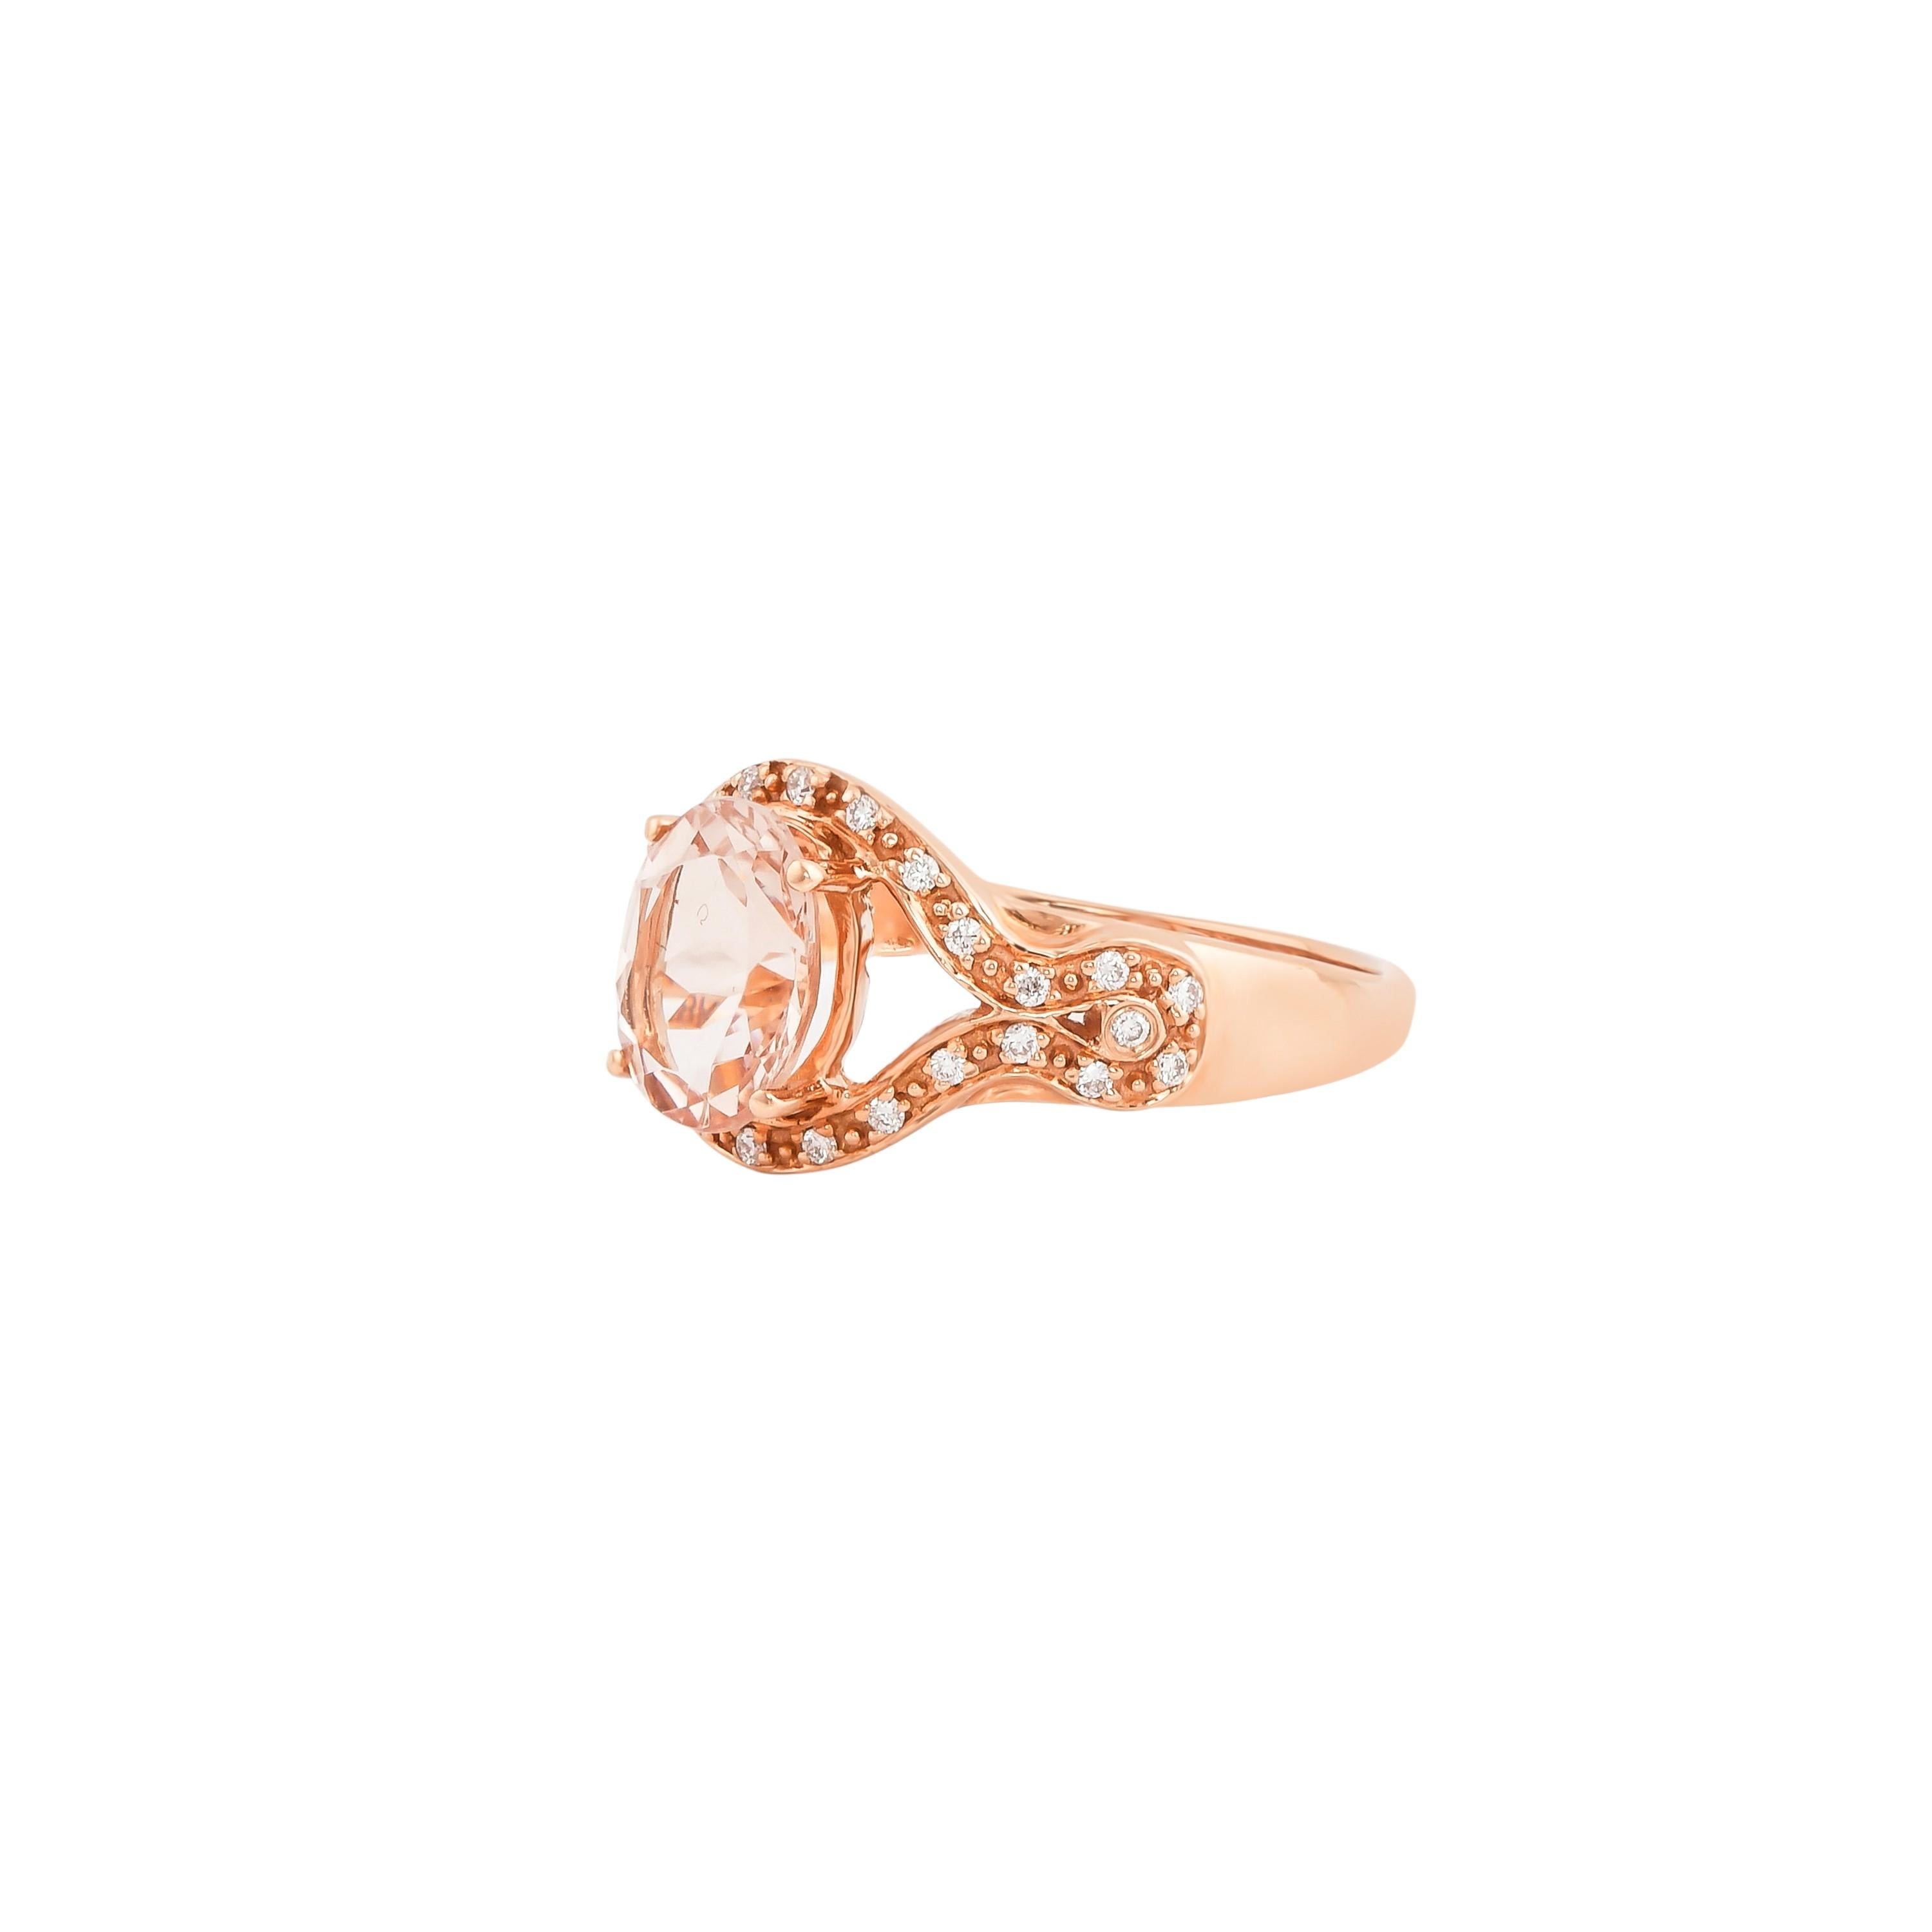 Oval Cut 1.5 Carat Morganite and Diamond Ring in 18 Karat Rose Gold For Sale